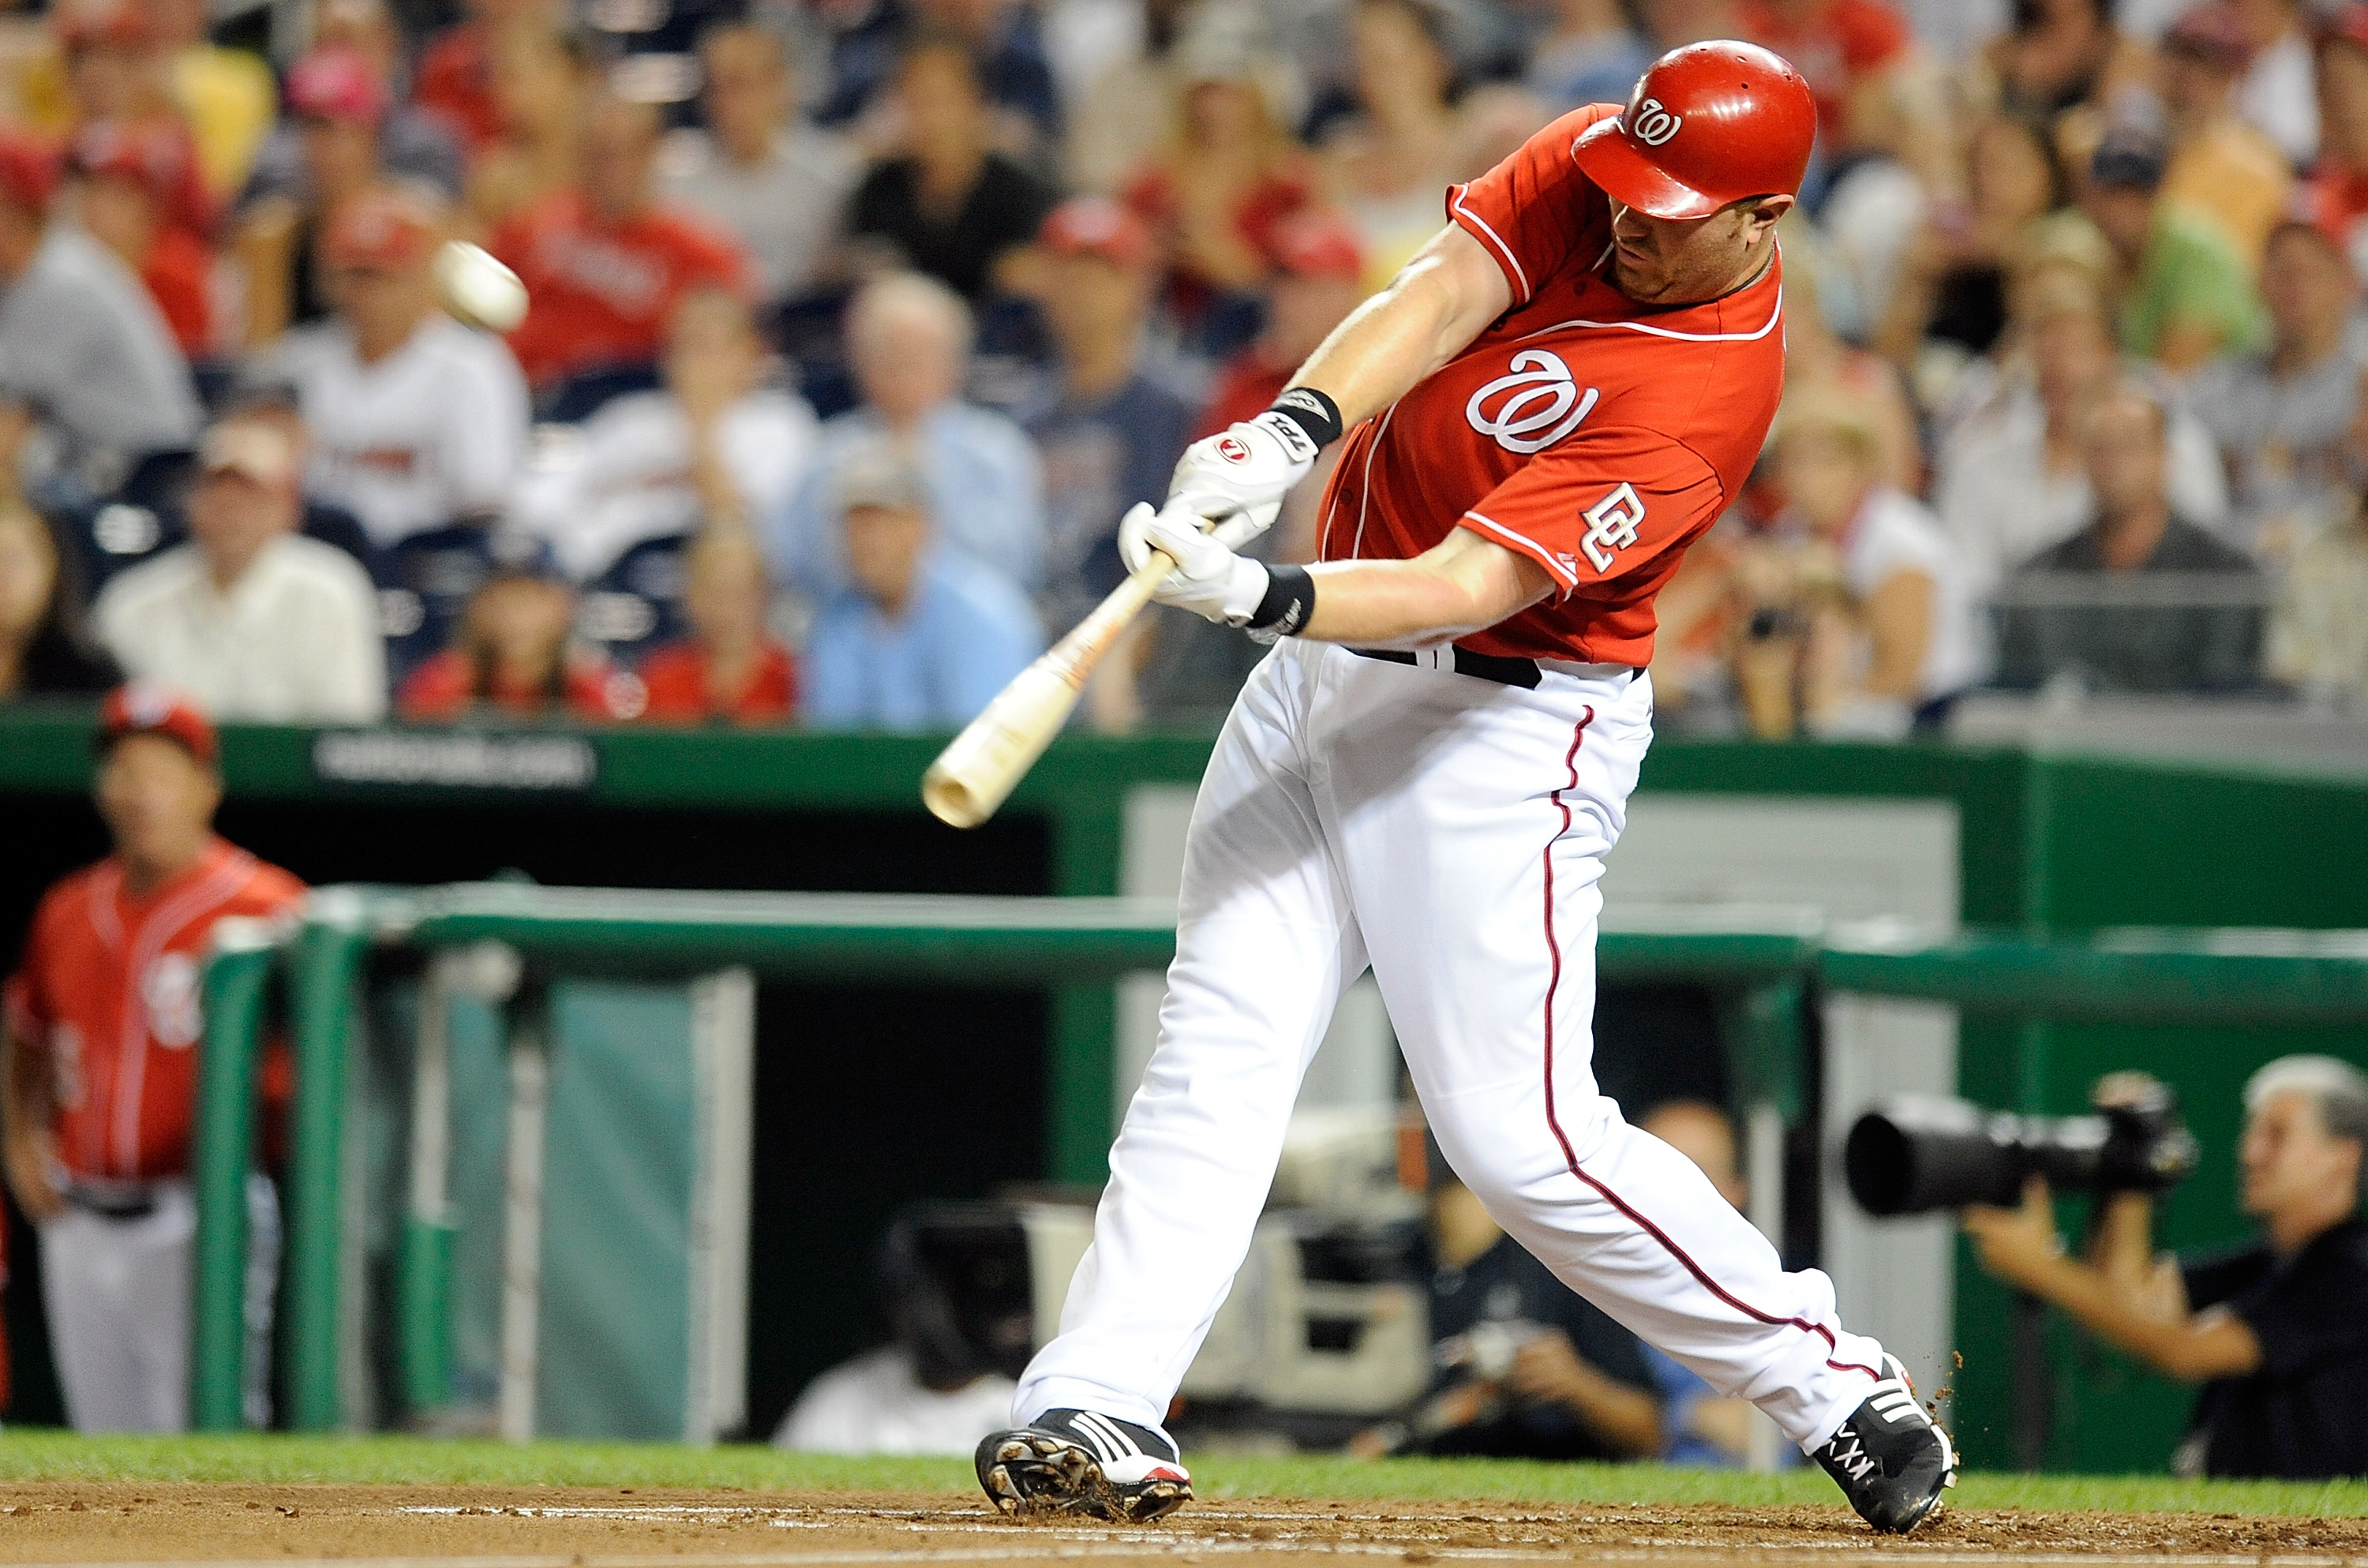 WASHINGTON - SEPTEMBER 24:  Adam Dunn #44 of the Washington Nationals hits a home run in the second inning against the Atlanta Braves at Nationals Park on September 24, 2010 in Washington, DC.  (Photo by Greg Fiume/Getty Images)